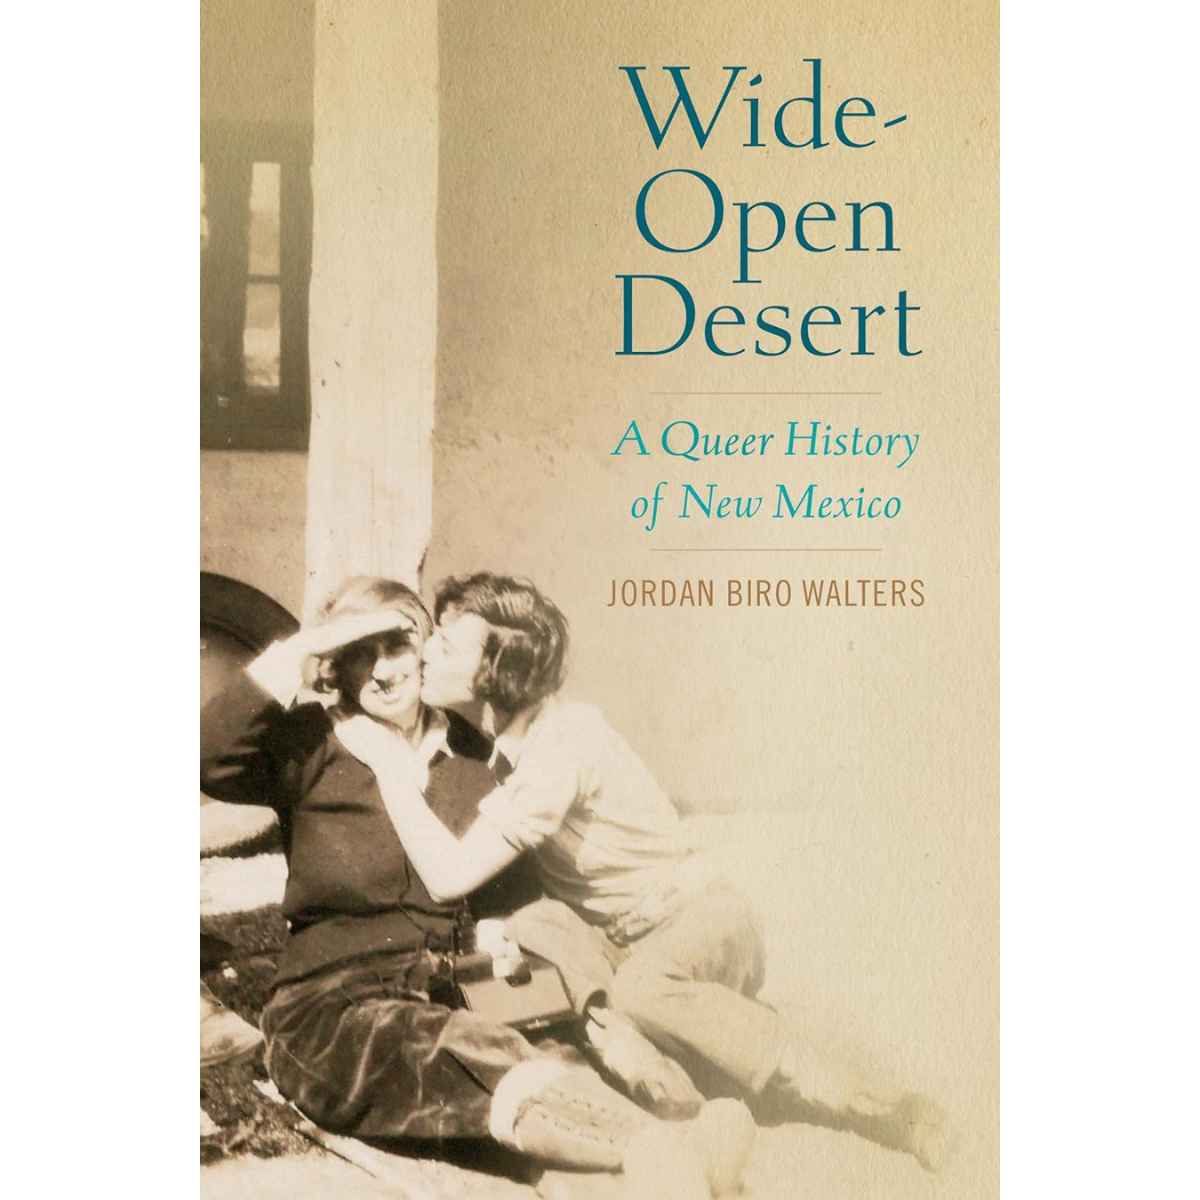 Wide-Open Desert: A Queer History of New Mexico